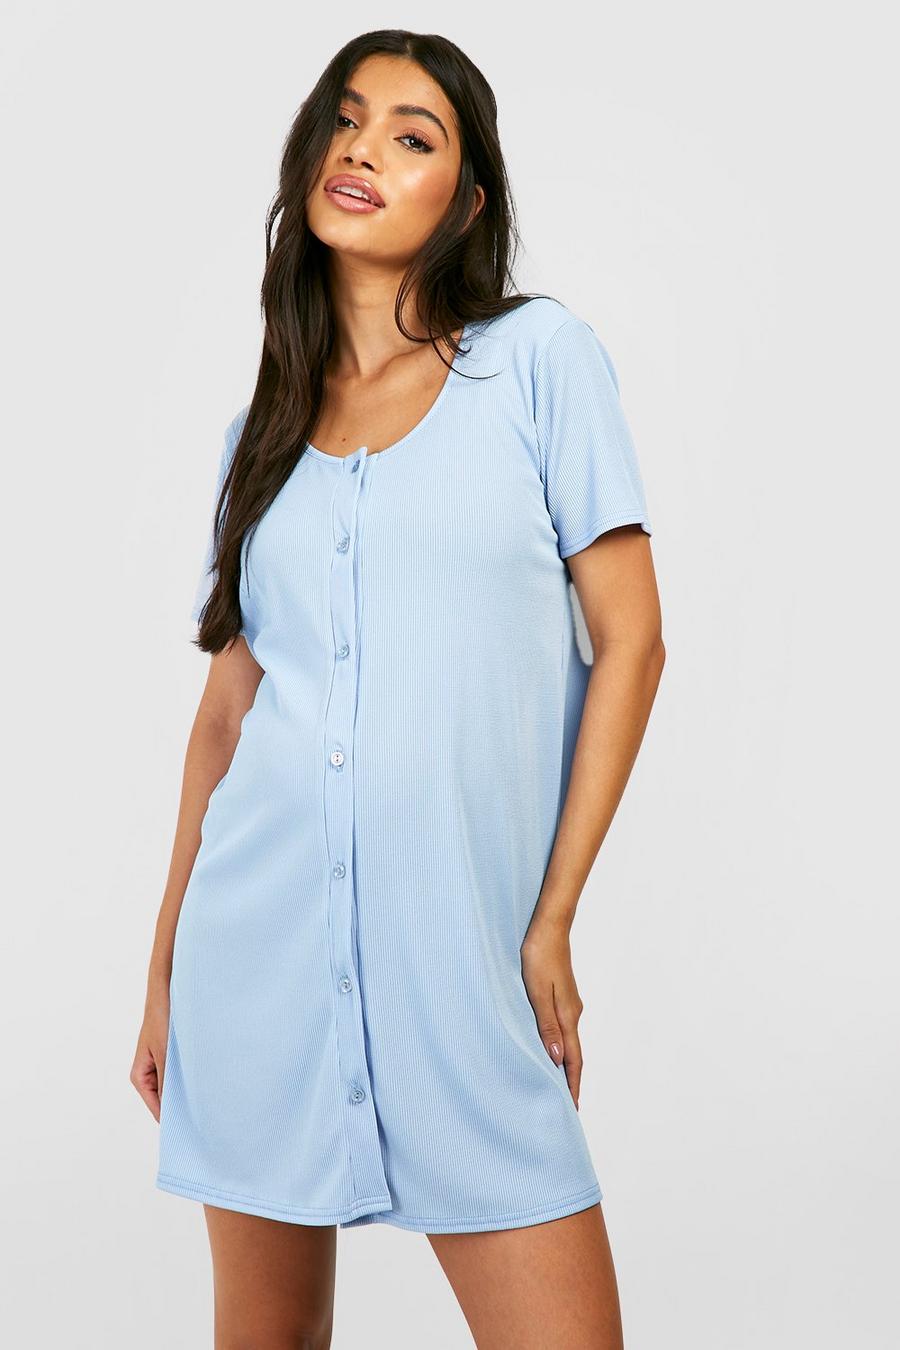 Baby blue Maternity Rib Button Front Nightgown